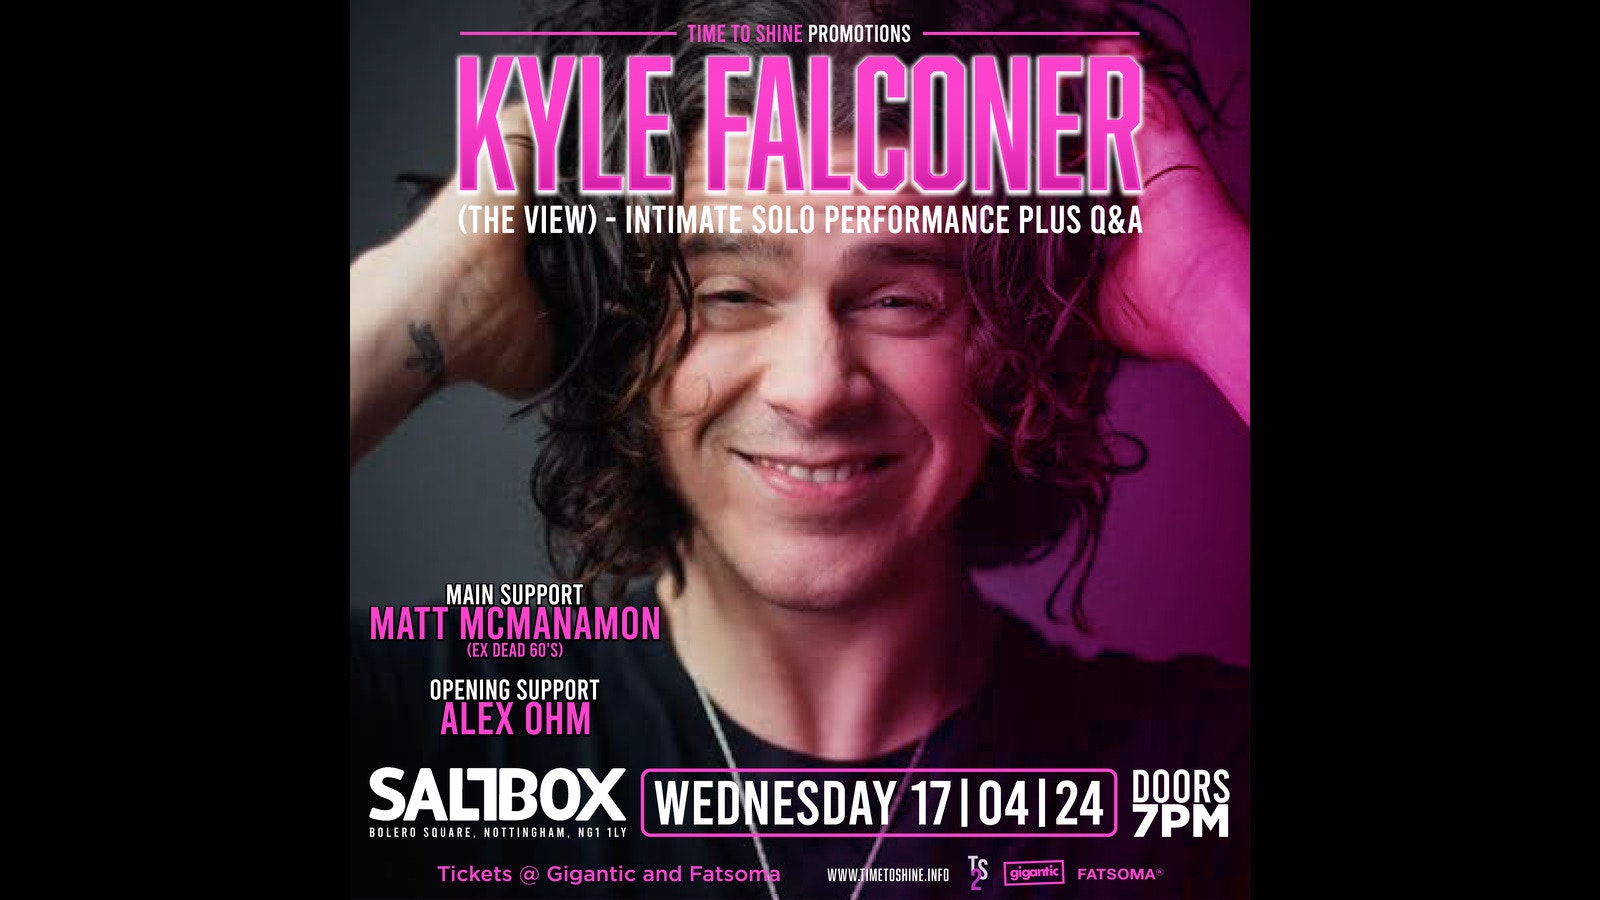 Time To Shine Promotions presents, KYLE FALCONER (The View) Live Solo Performance including Q&A